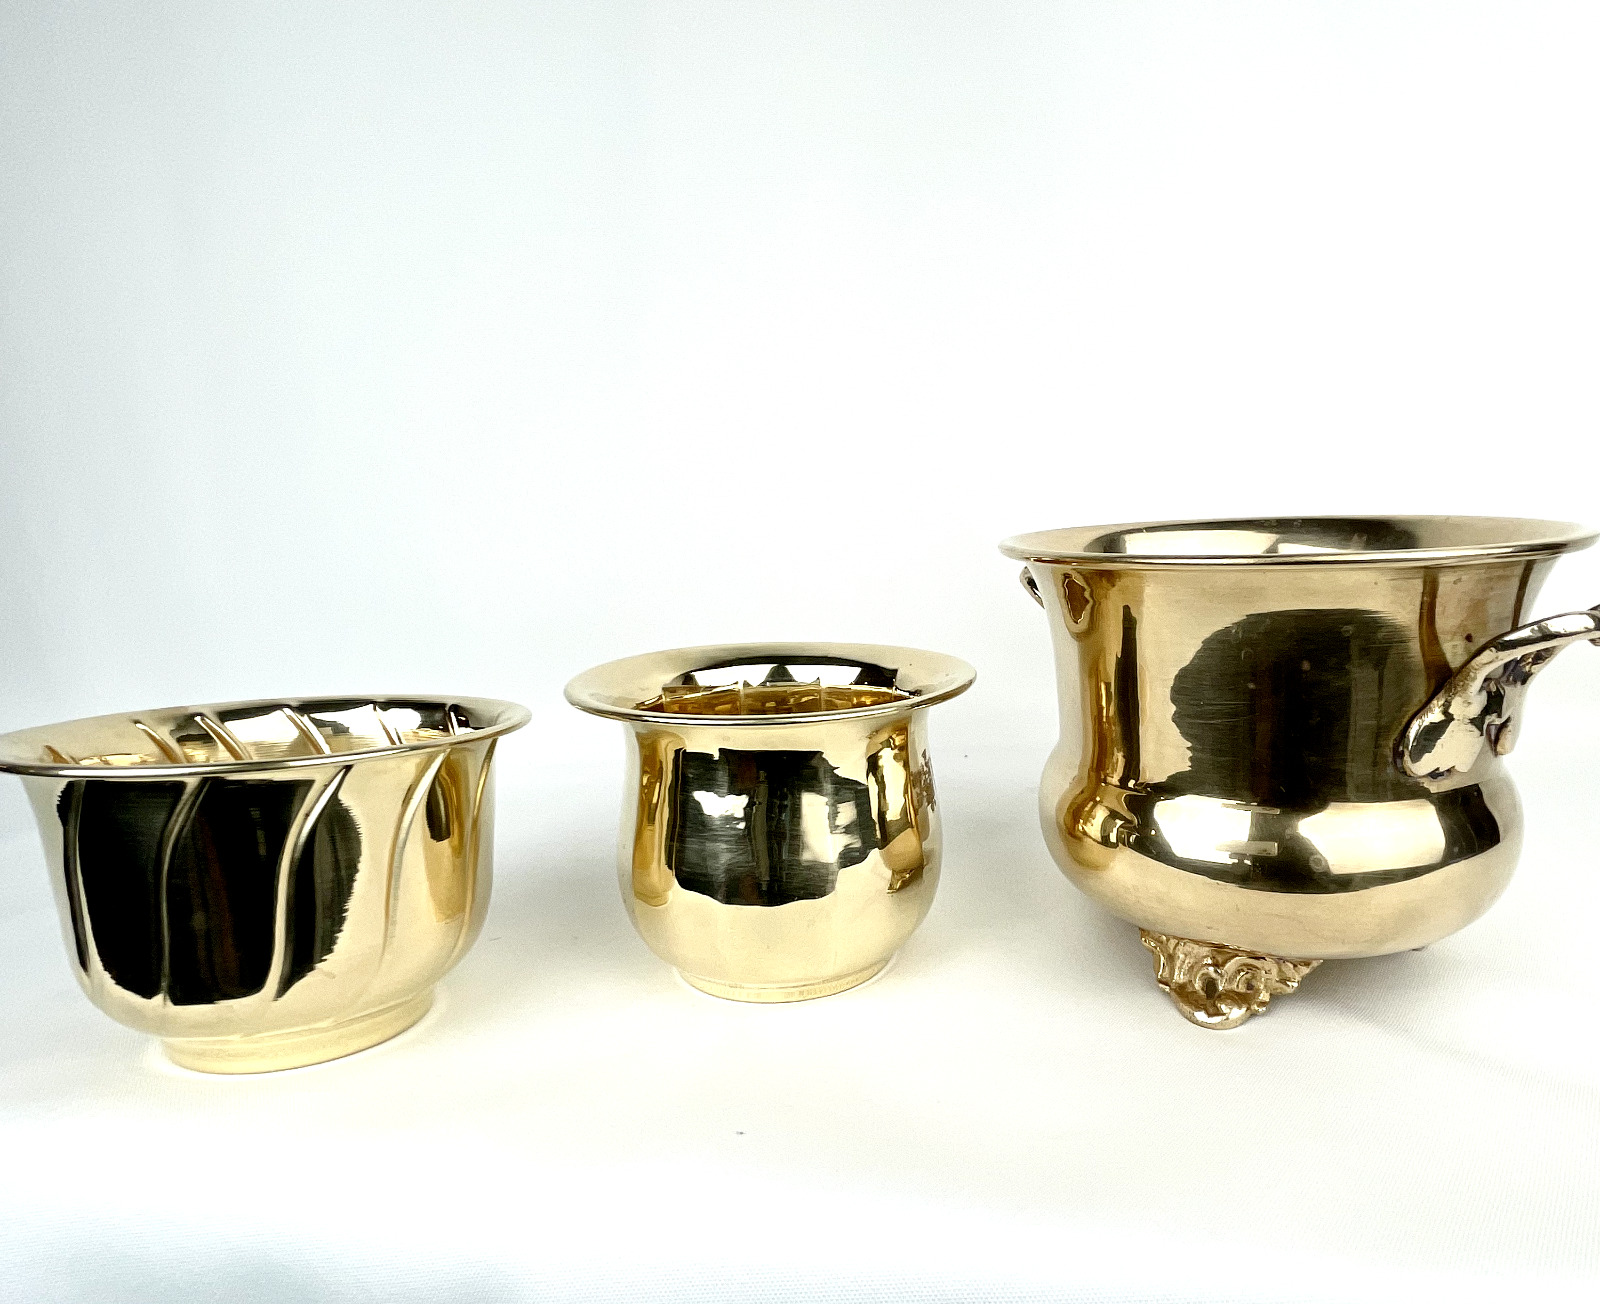 Lot of 3 Vintage Brass Planter, Cups, Bowls, Decorative containers Made in India